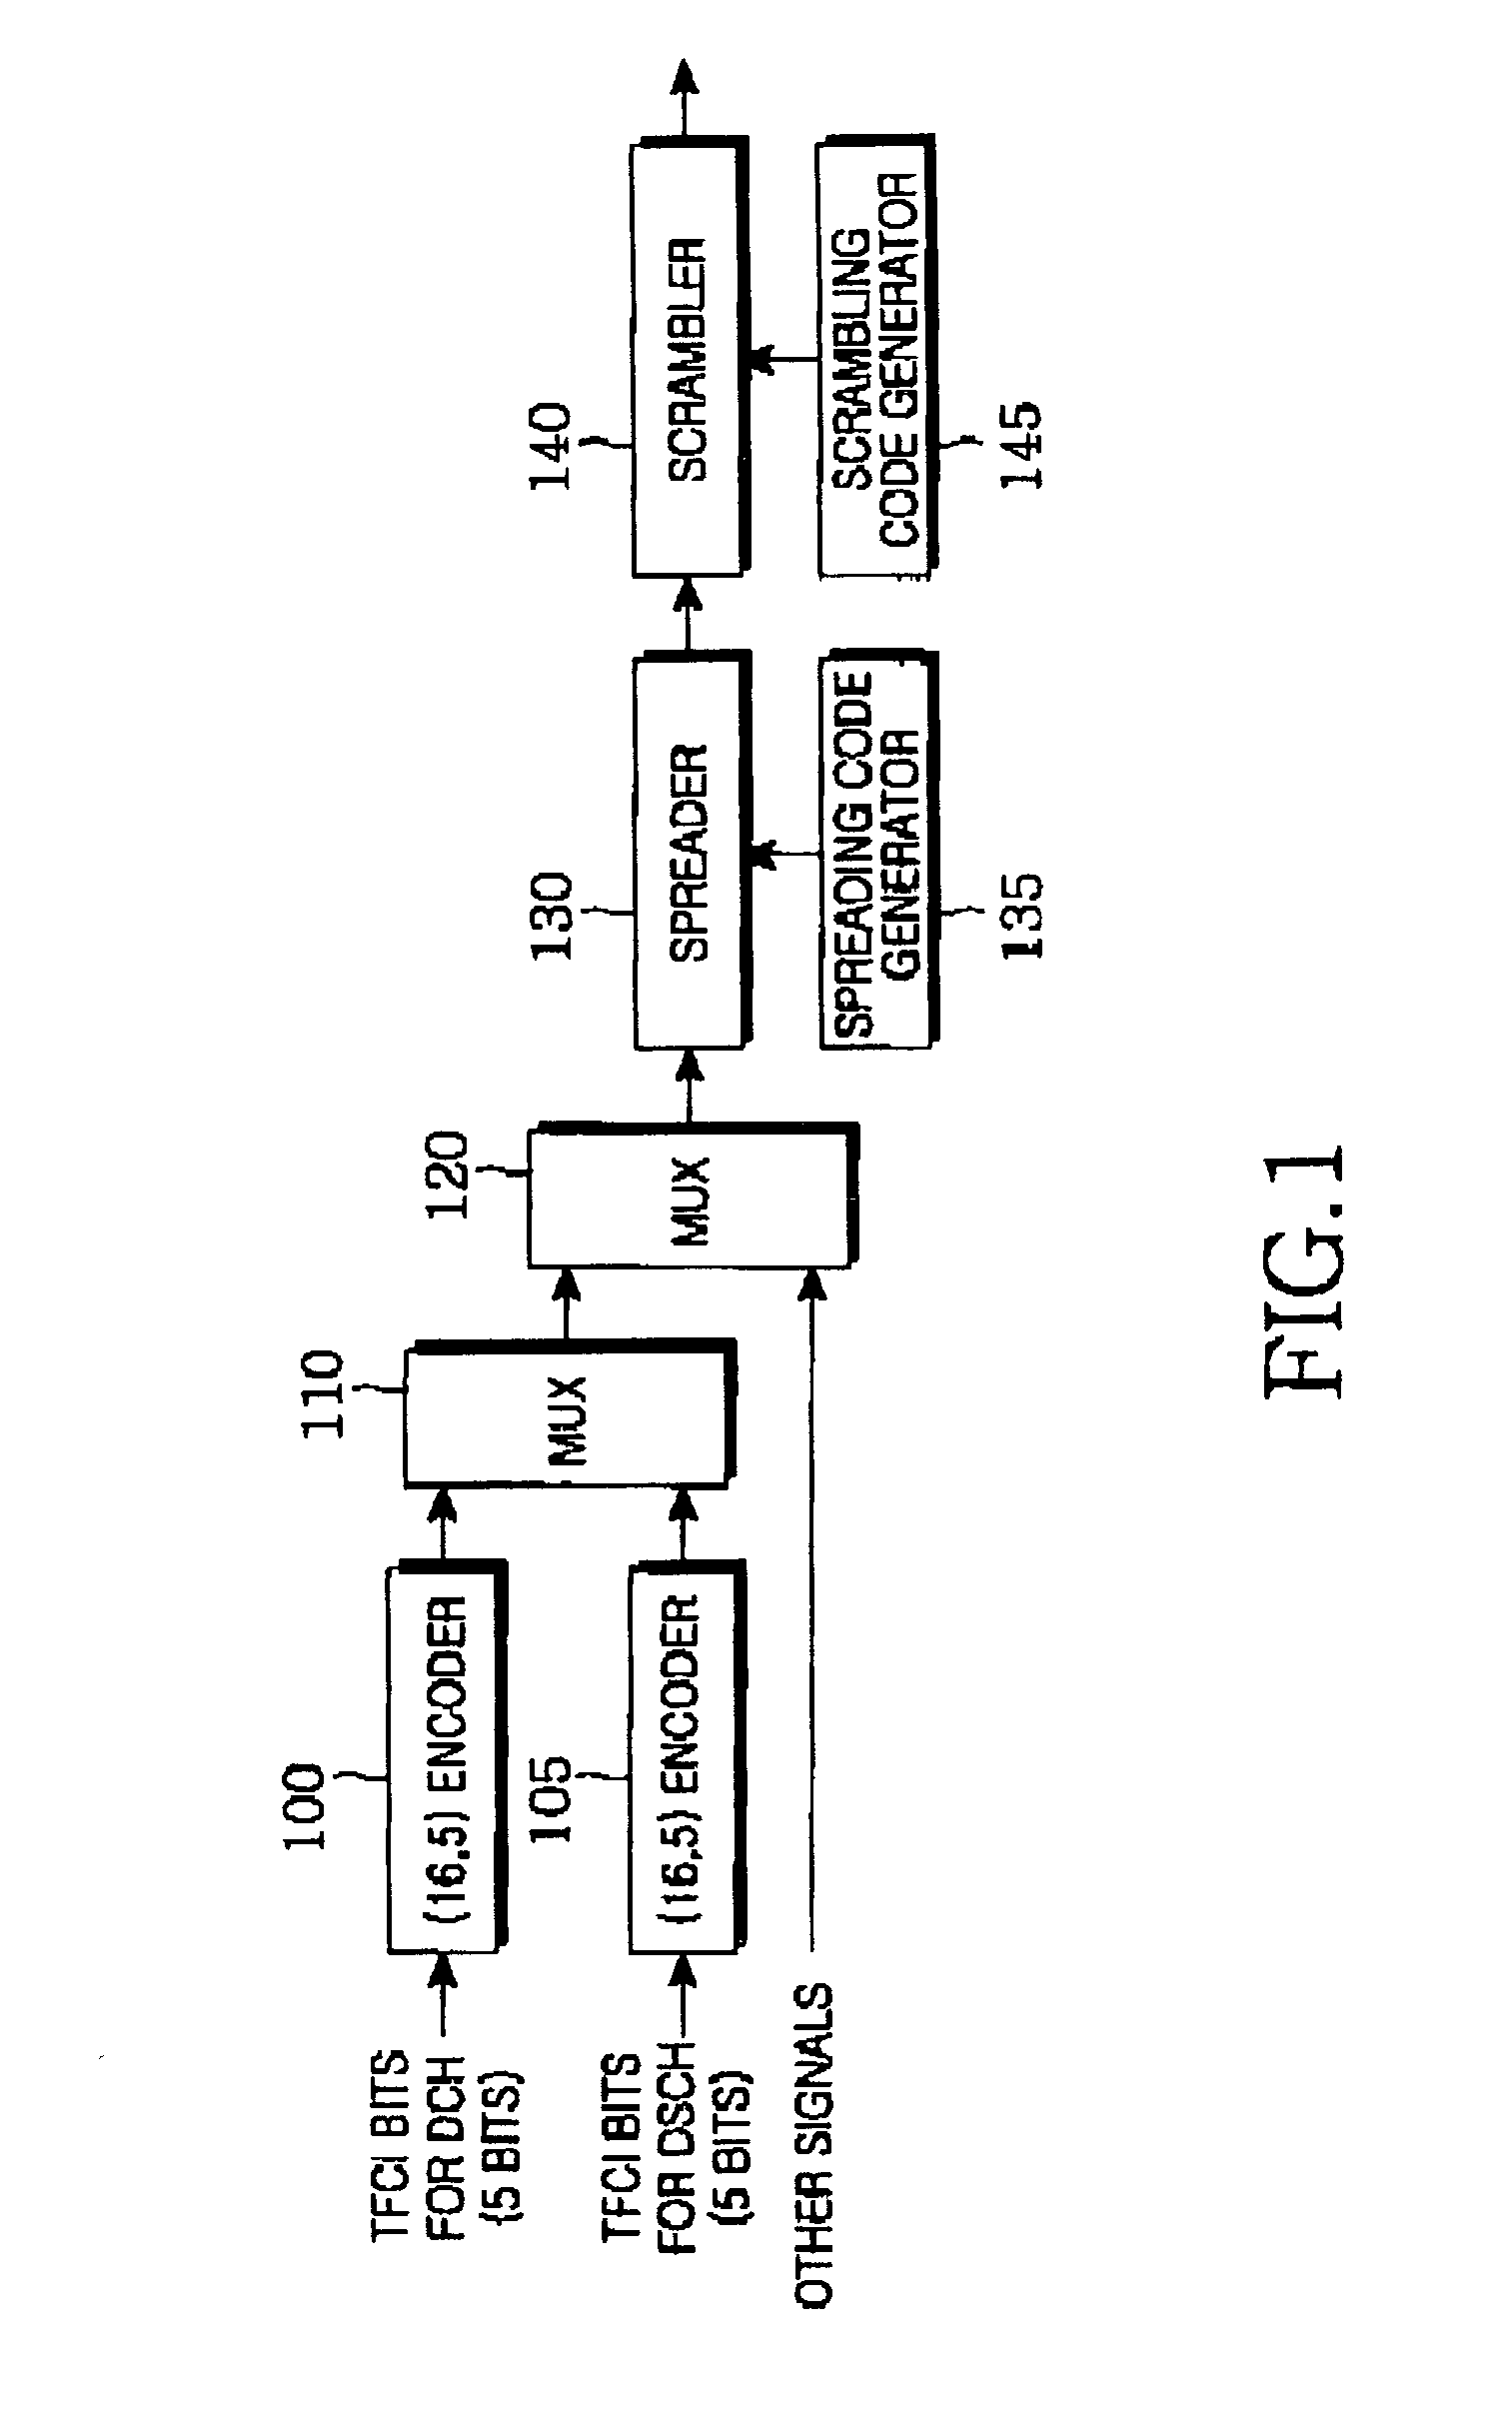 Apparatus and method for symbol mapping TFCI bits for a hard split mode in a CDMA mobile communication system